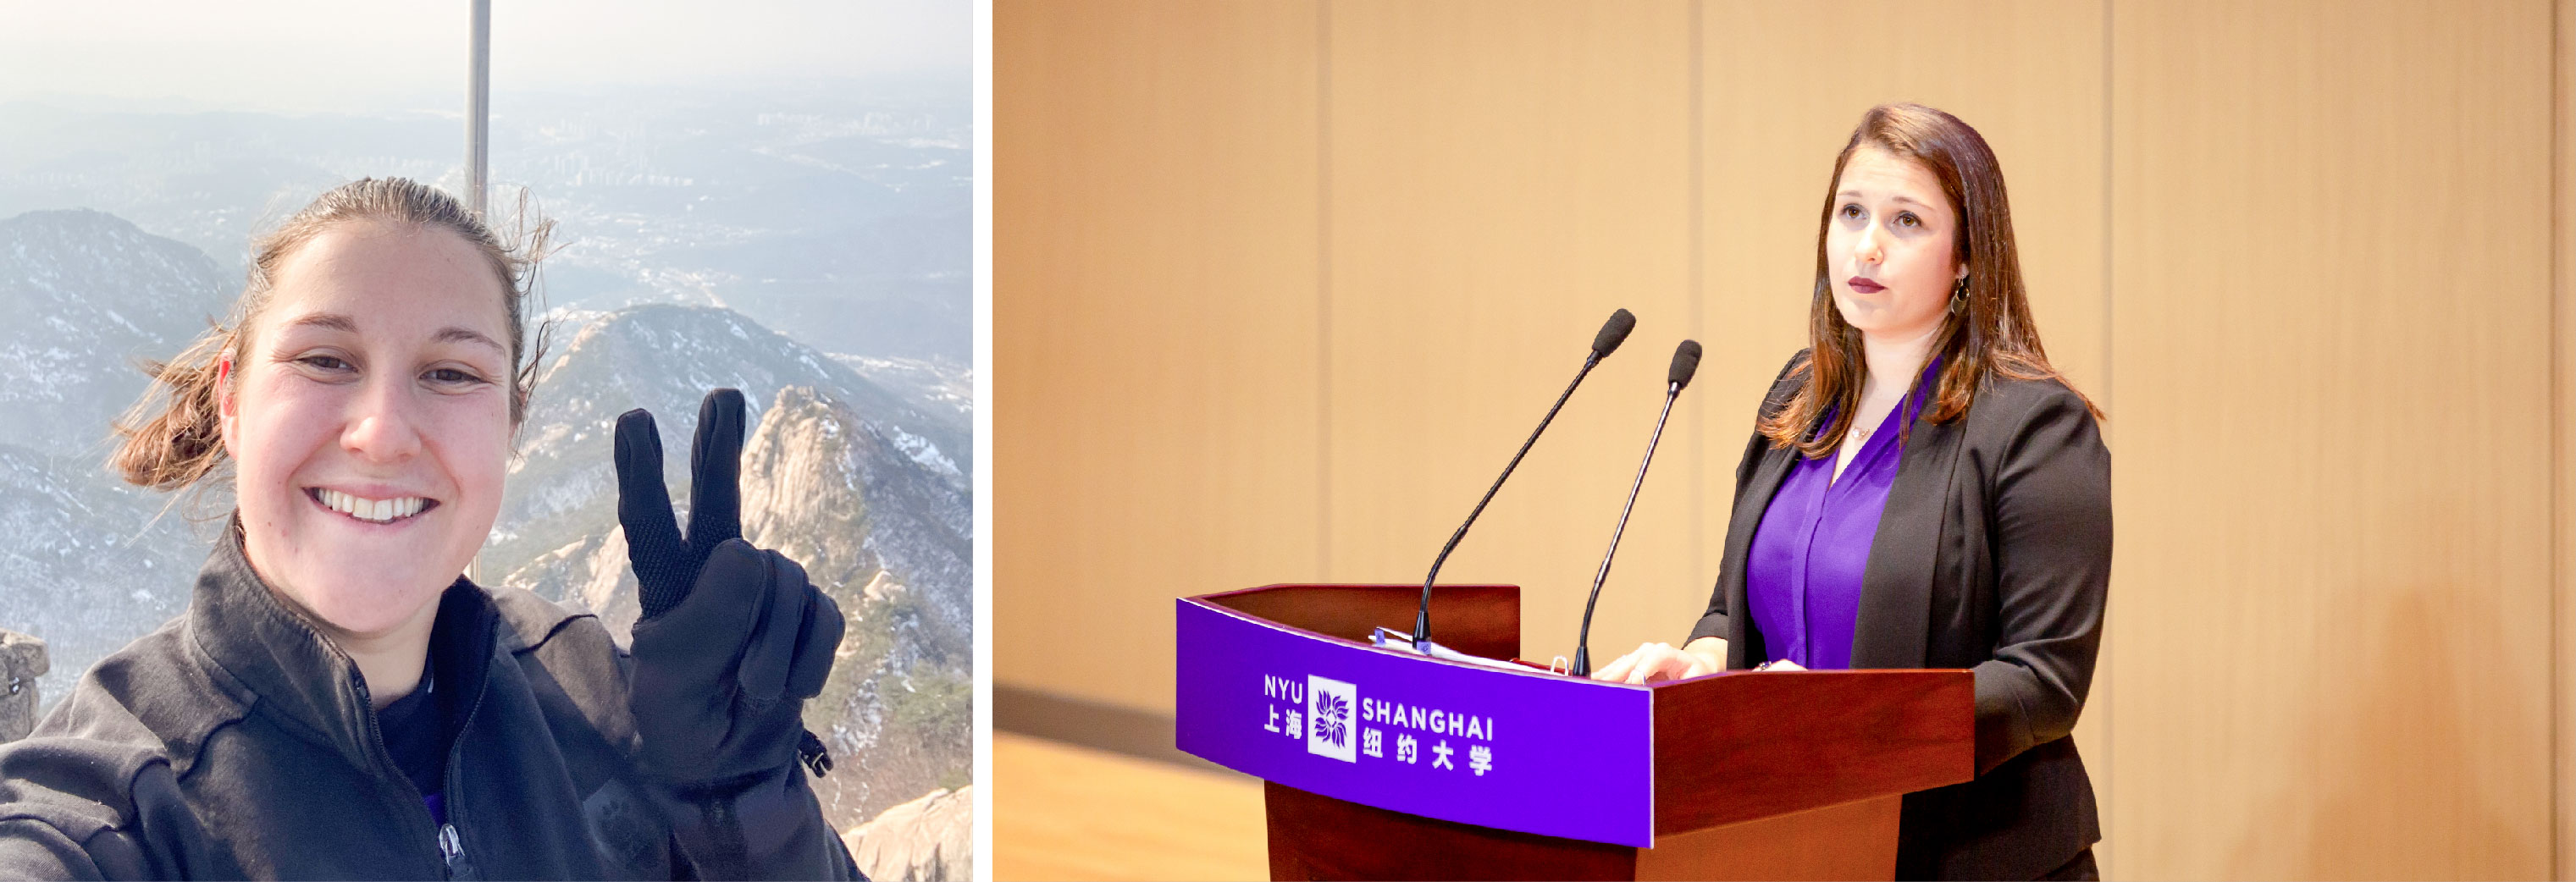 Left: Hiking Bukhansan Mountain in South Korea. Right: Giving a speech as student body president in front of former NYU President Andrew Hamilton at NYU Shanghai’s 10th Anniversary celebrations in 2023.